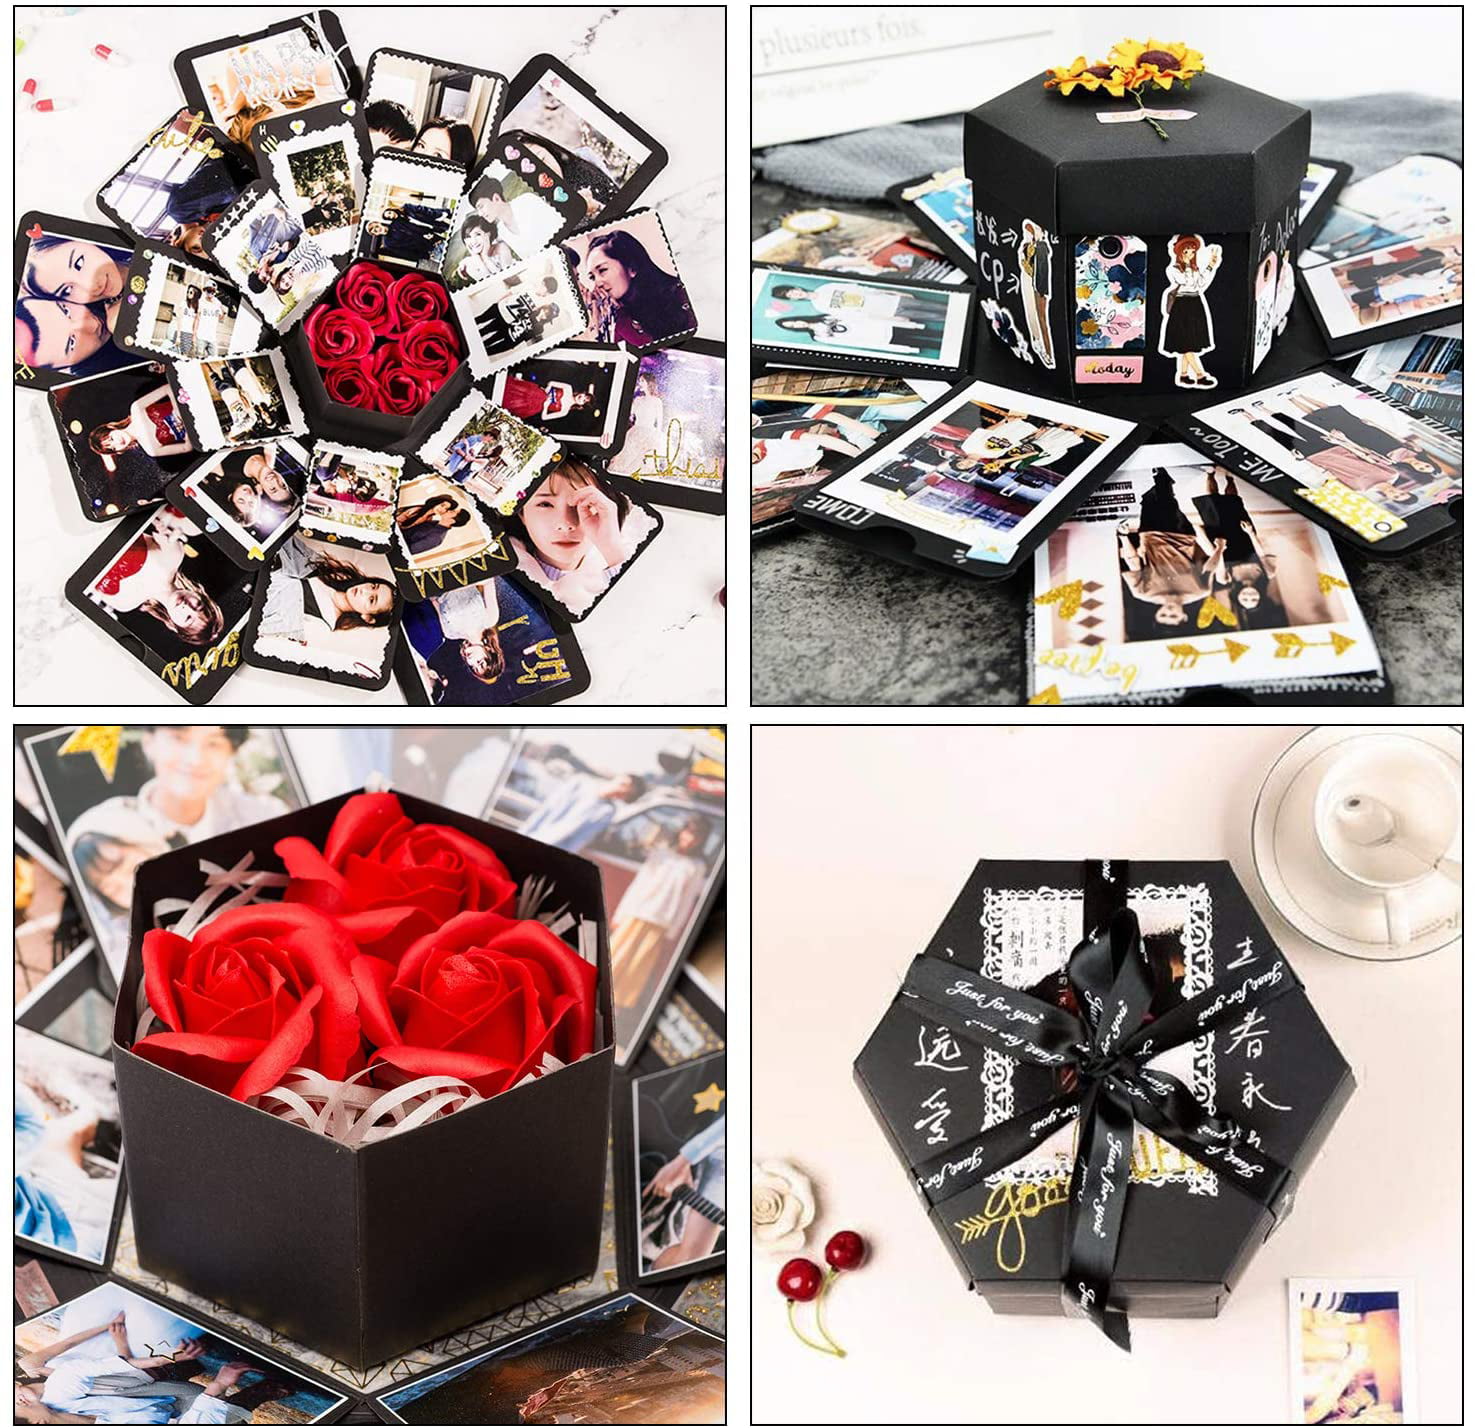 Surprise Box, Creative Explosion Box DIY Gift Scrapbook and Photo Album Gift Box As A Birthday Present About Love, Surprise to Open, Size: 39.3